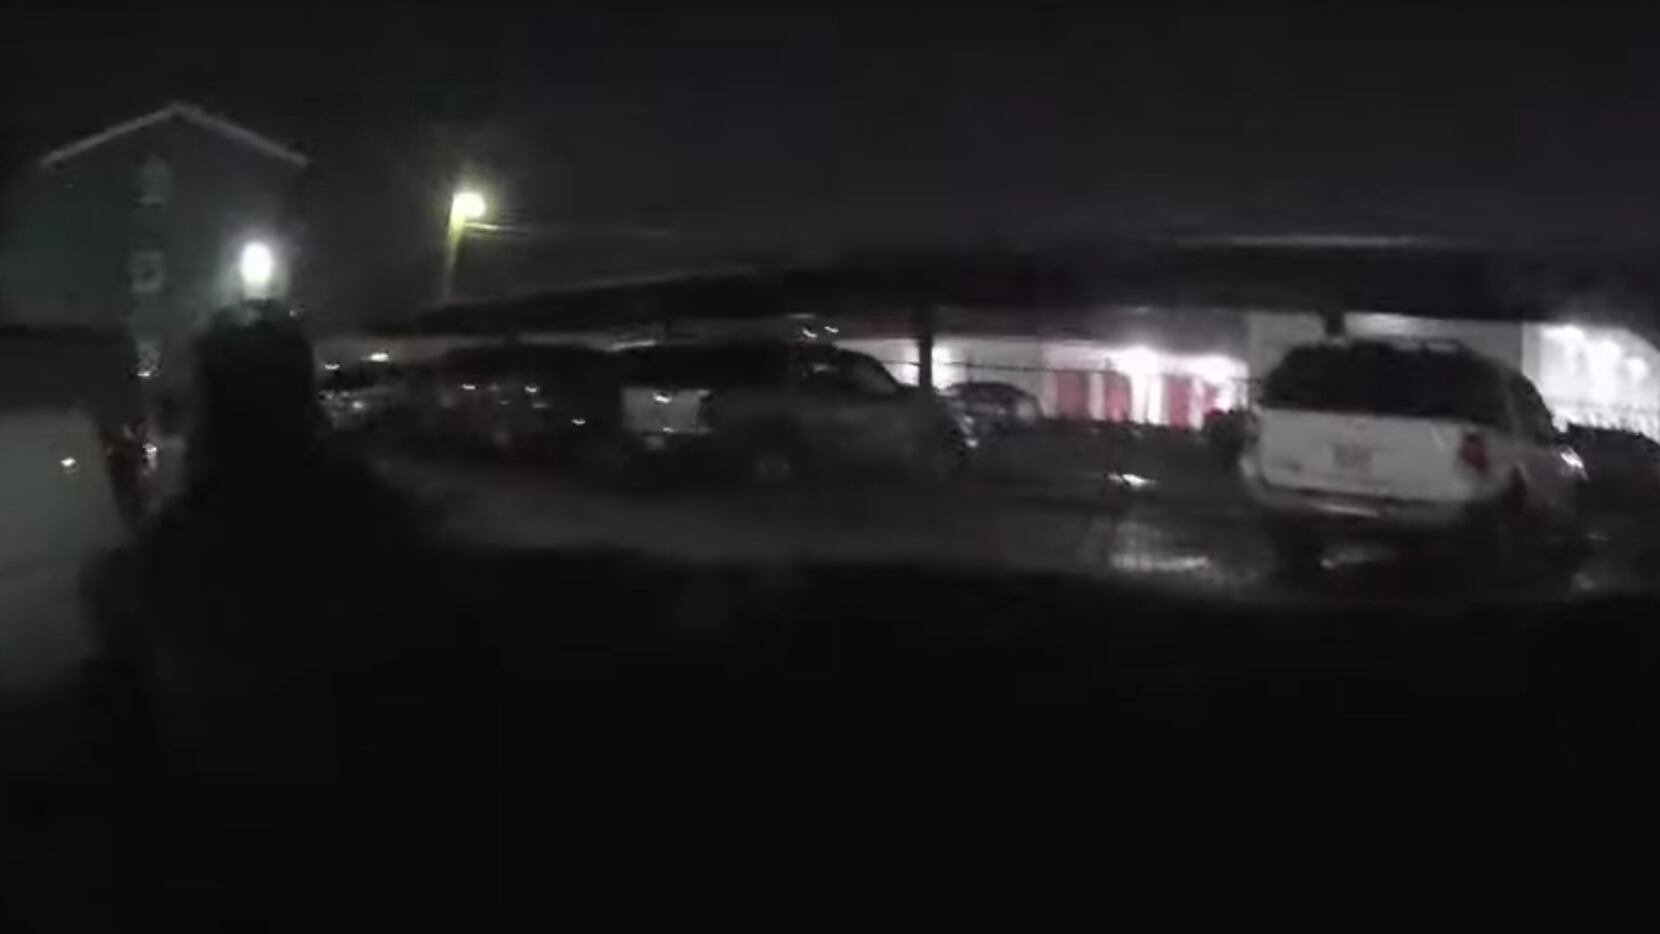 Police released body-camera footage of the incident Tuesday.